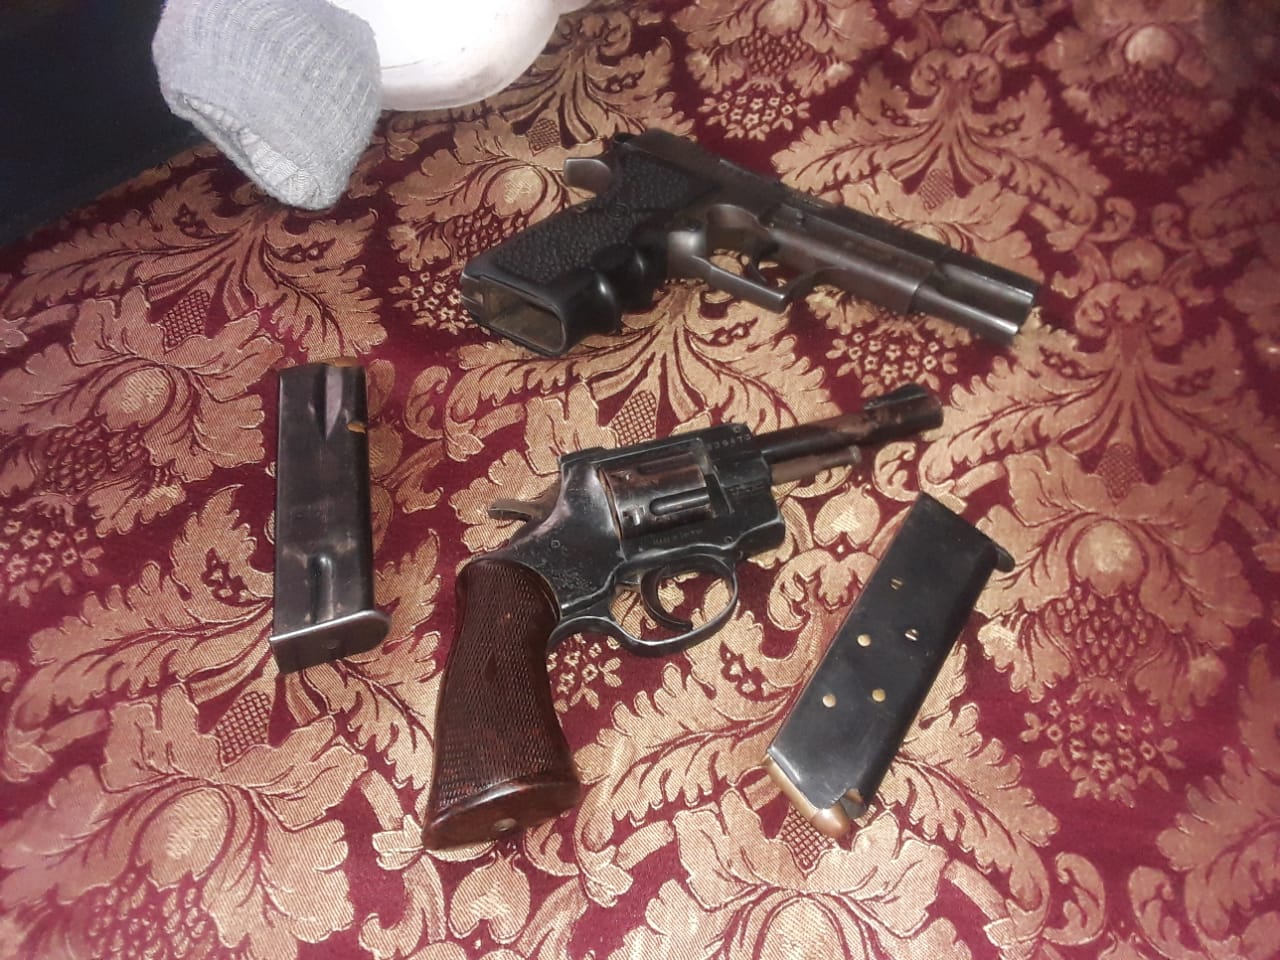 Two firearms seized in successful combined operation